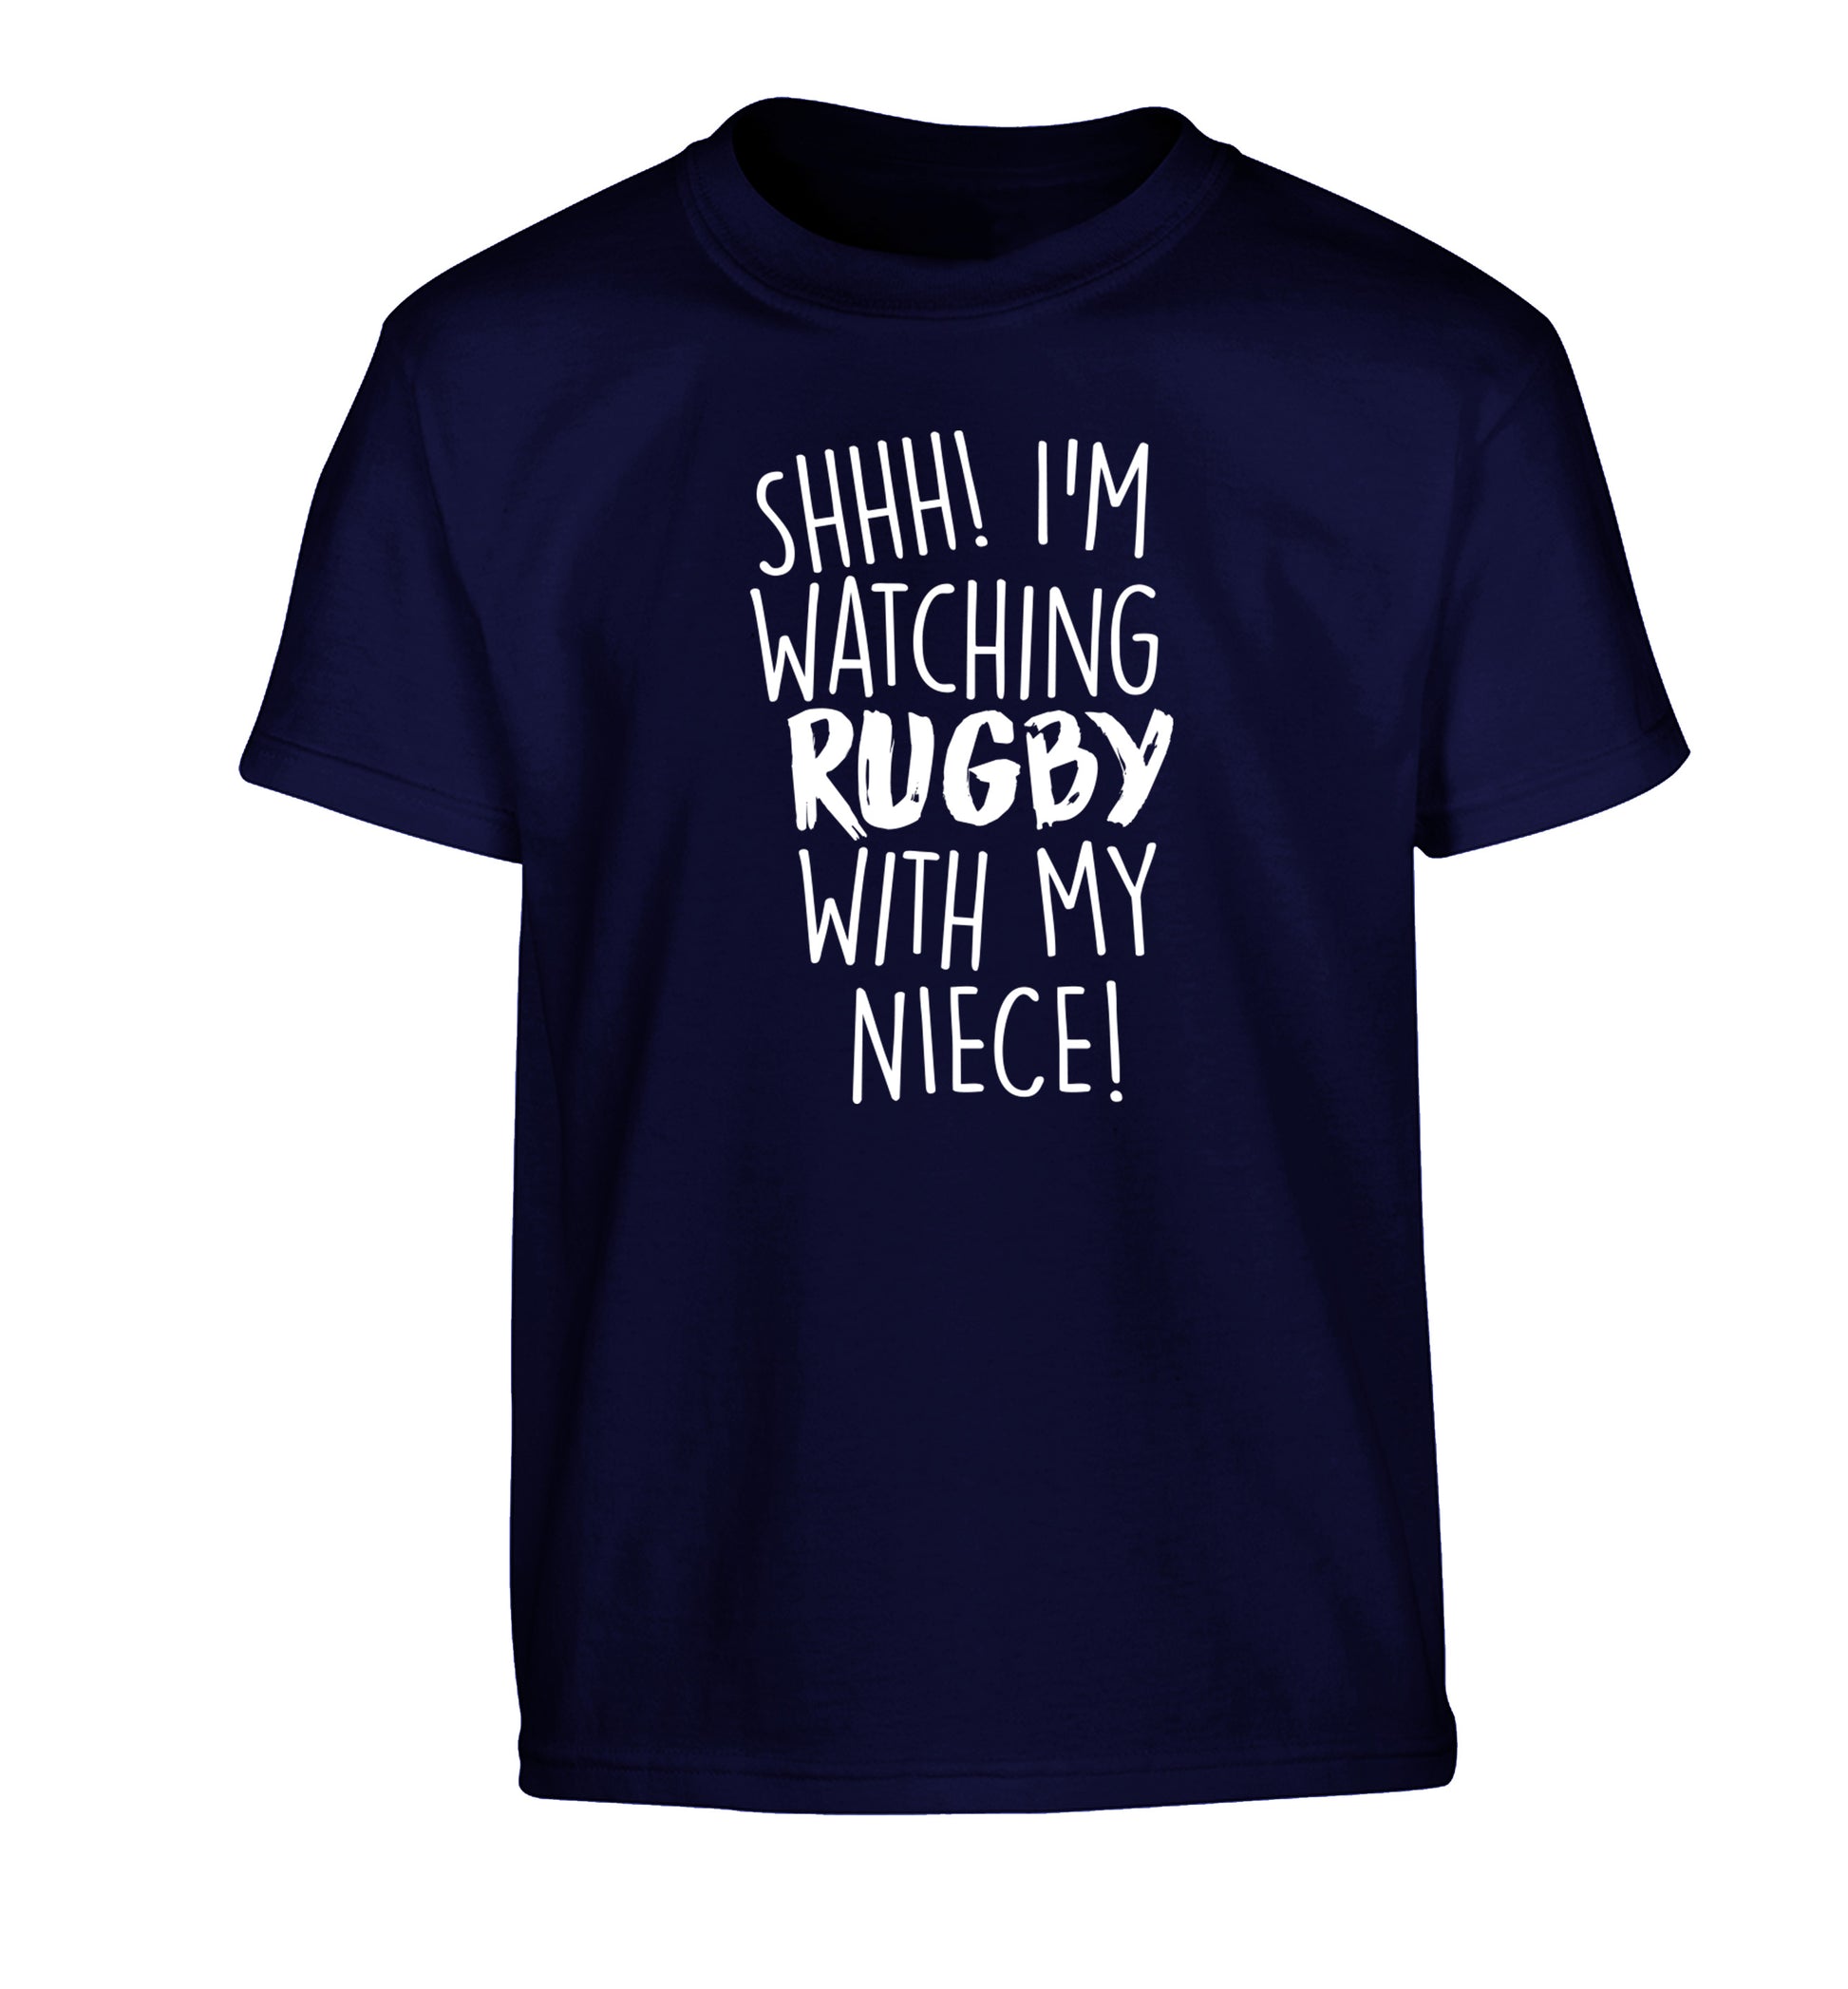 Shh.. I'm watching rugby with my niece Children's navy Tshirt 12-13 Years